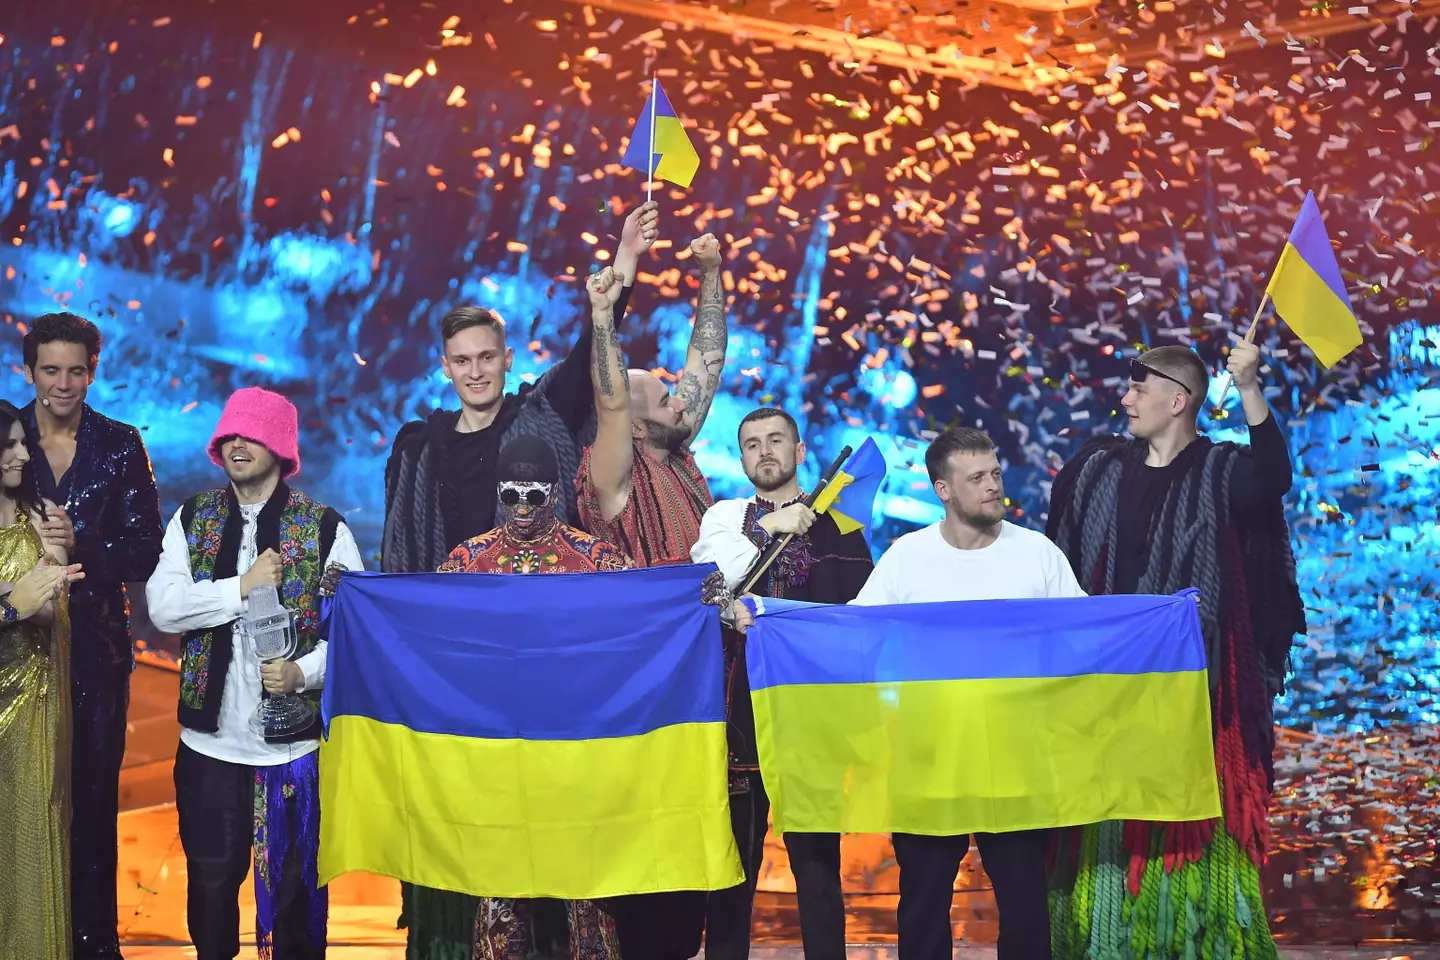 Russian hackers reportedly targeted Eurovision.